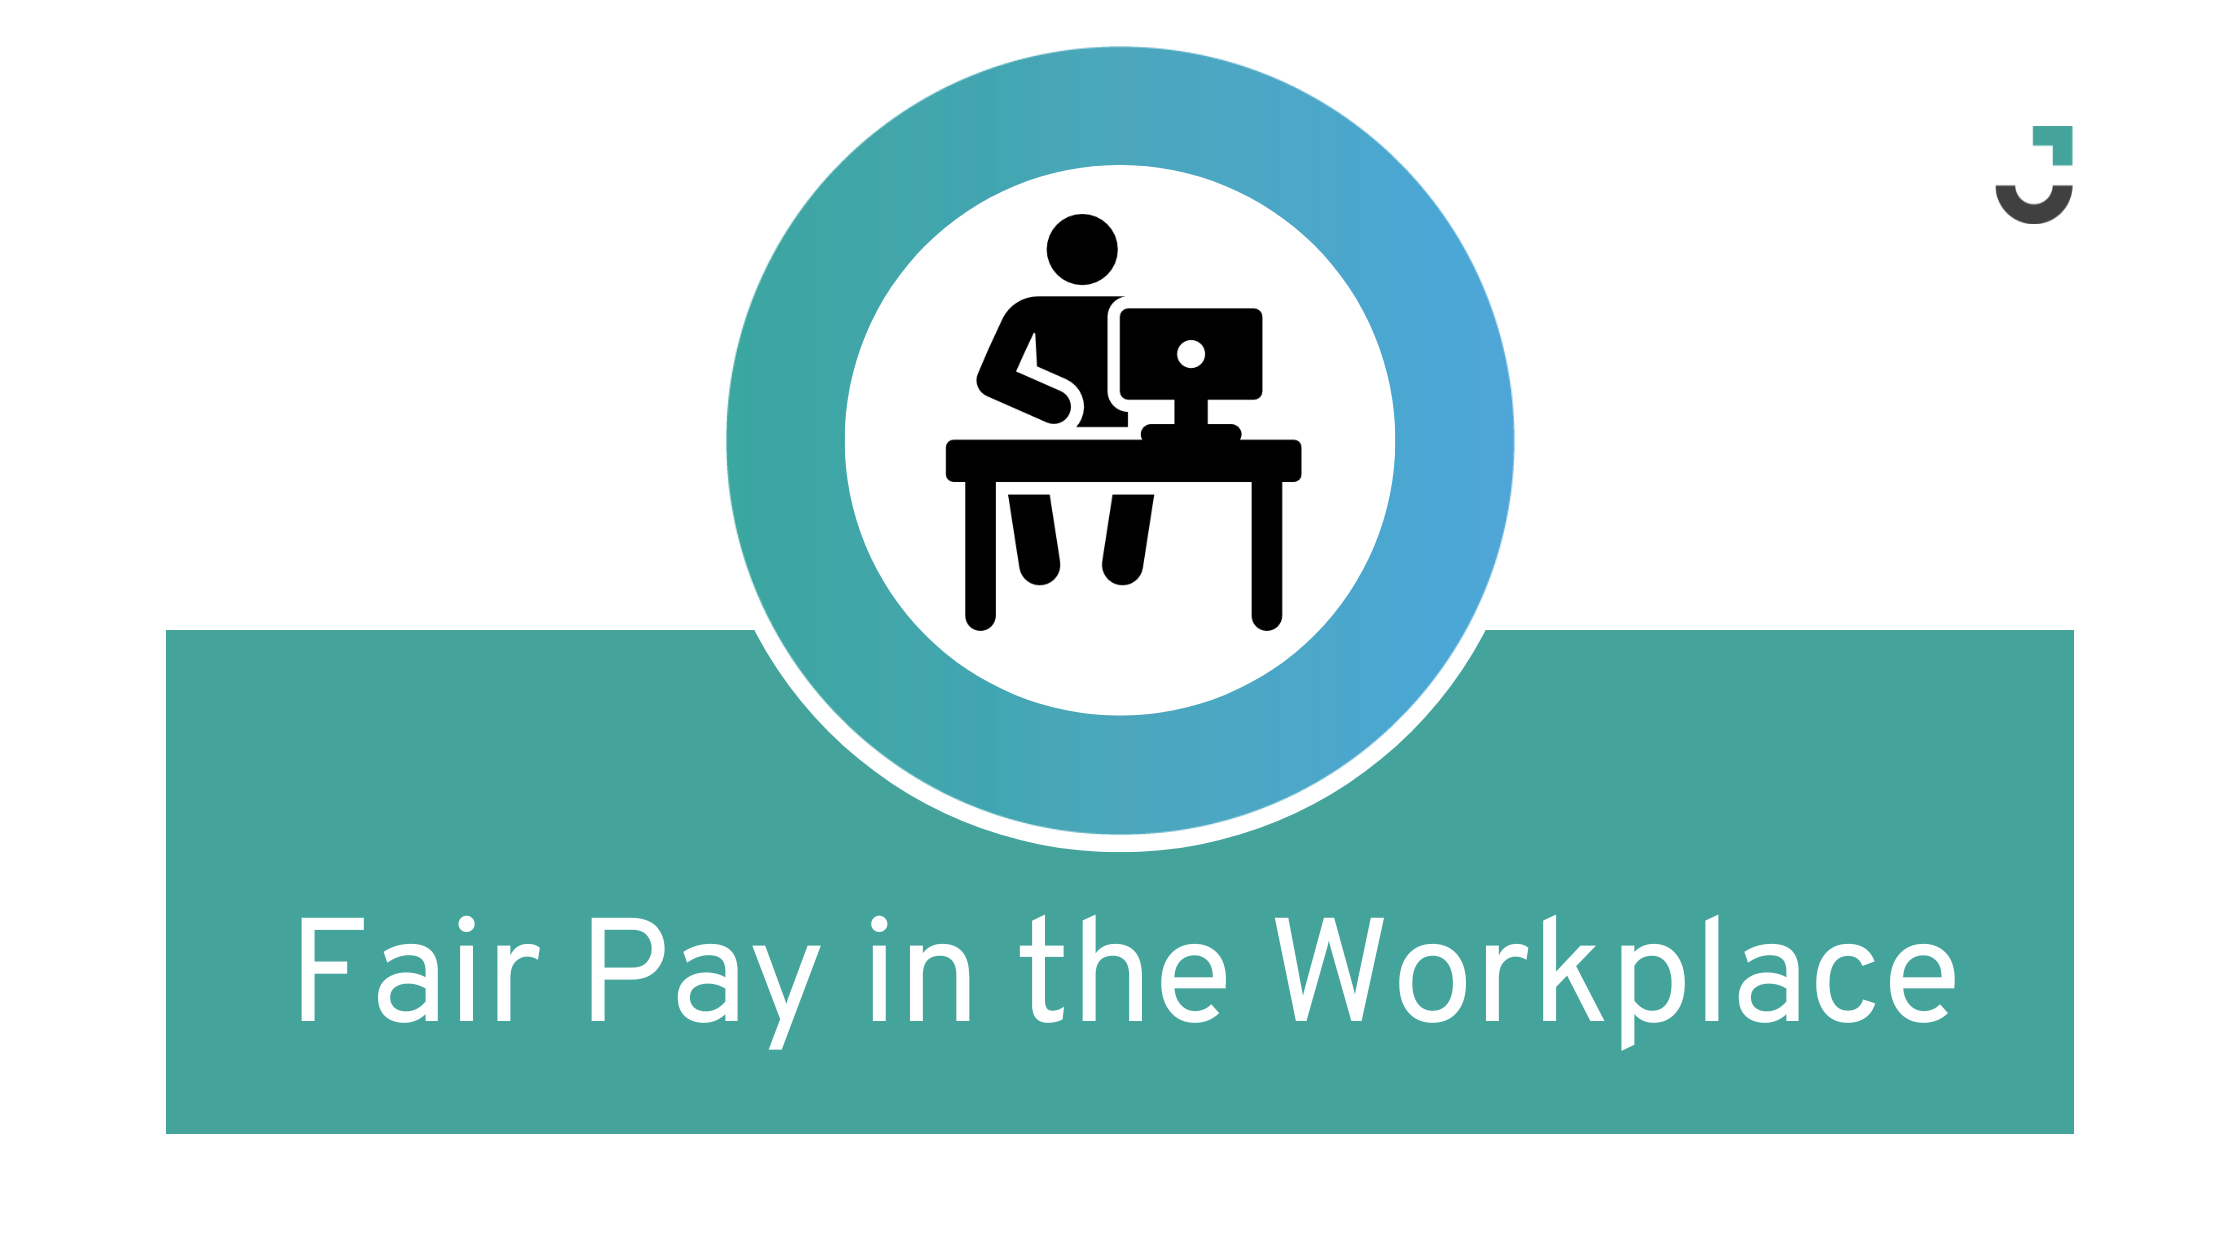 Fair Pay in the Workplace